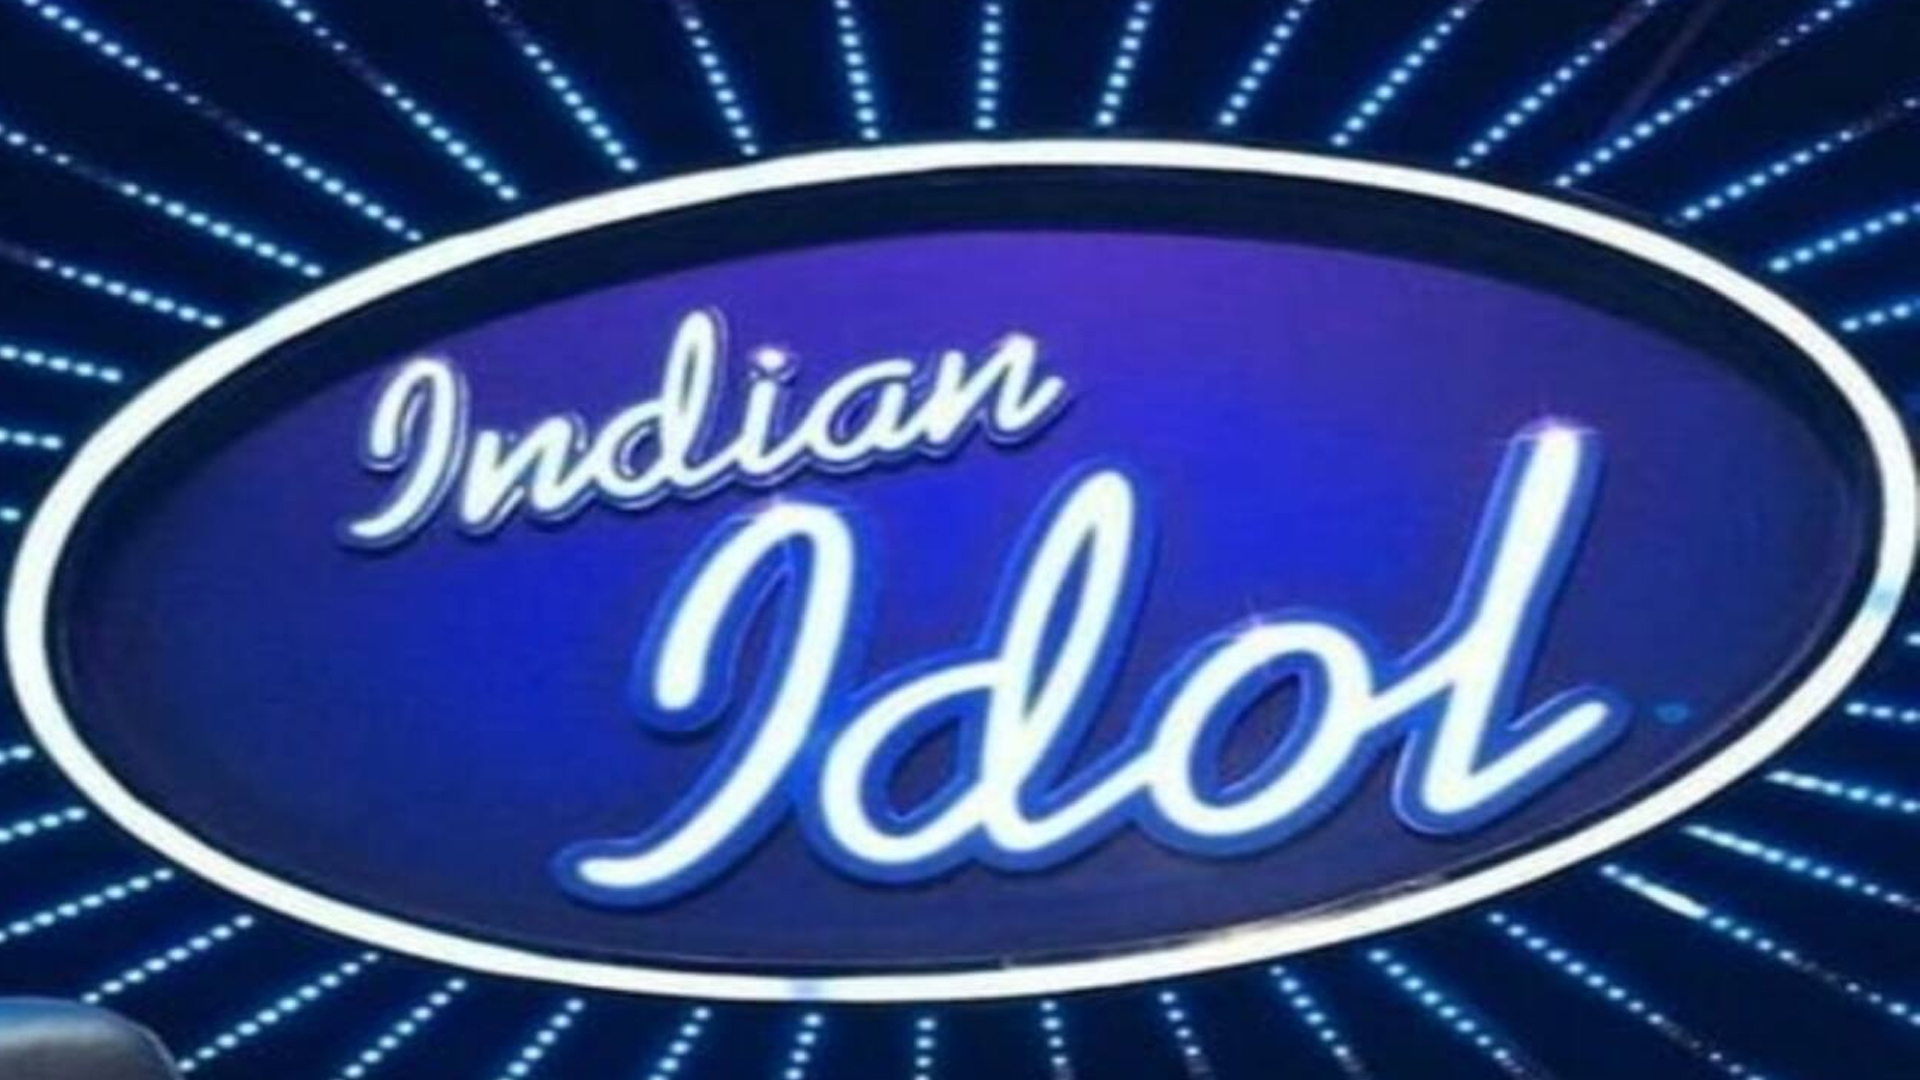 ARE YOU THE NEXT INDIAN IDOL?